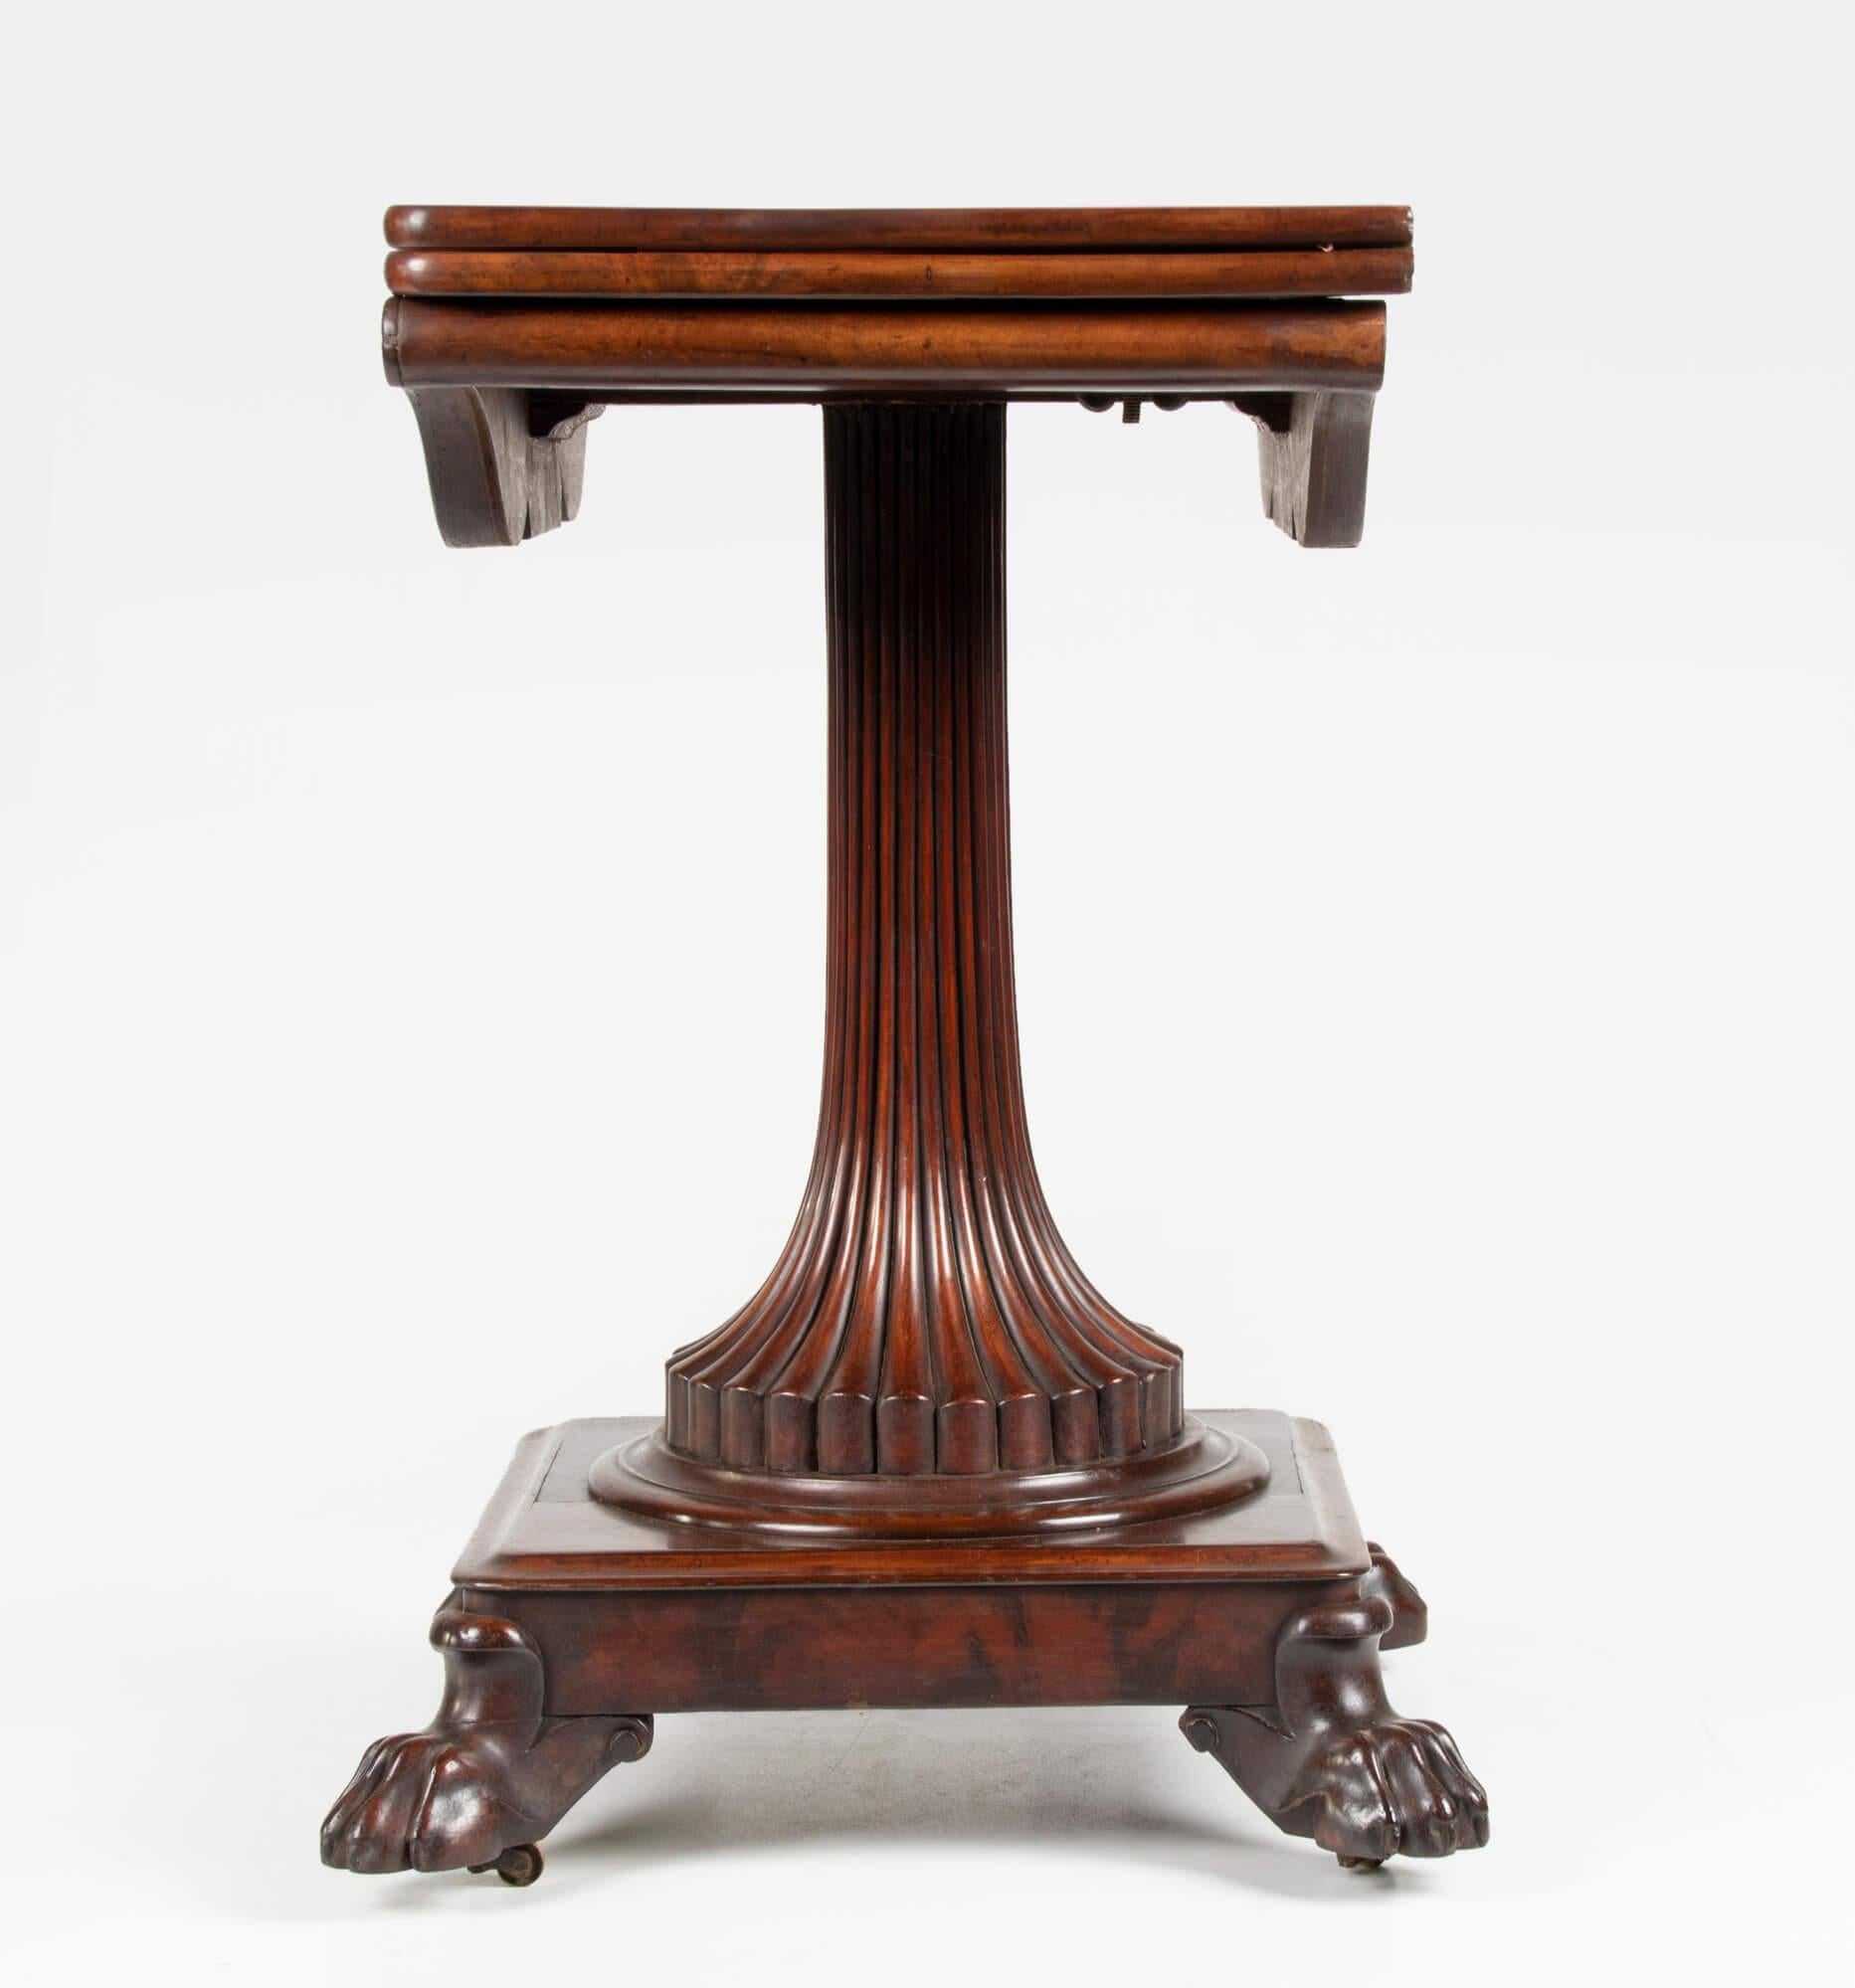 Hand-Crafted 19th Century English Mahogany Regency Flip Top Game Table and Side Table For Sale